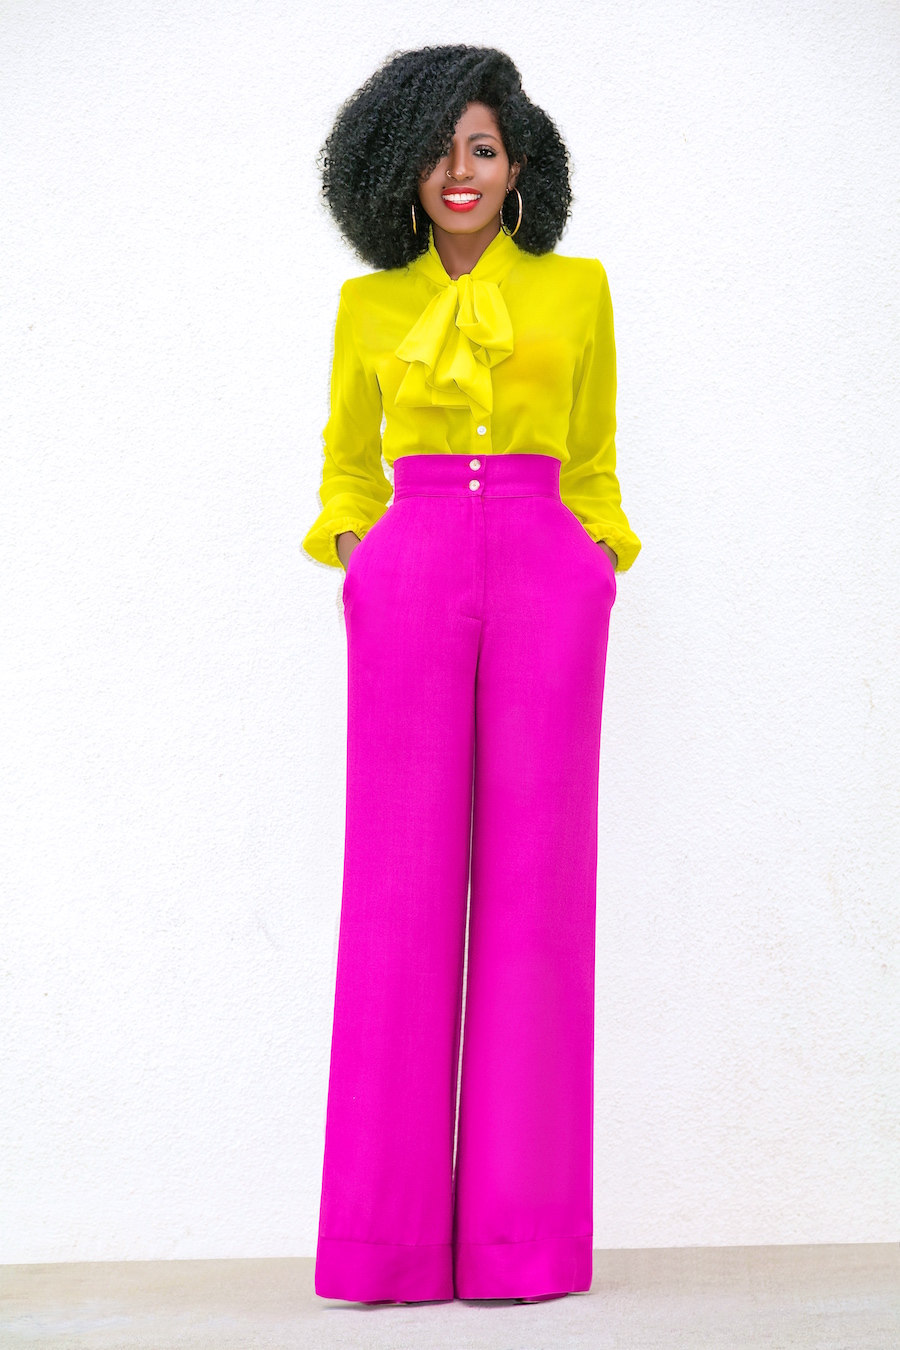 Style Pantry | Front Tie Blouse + High Waist Wide Leg Pants